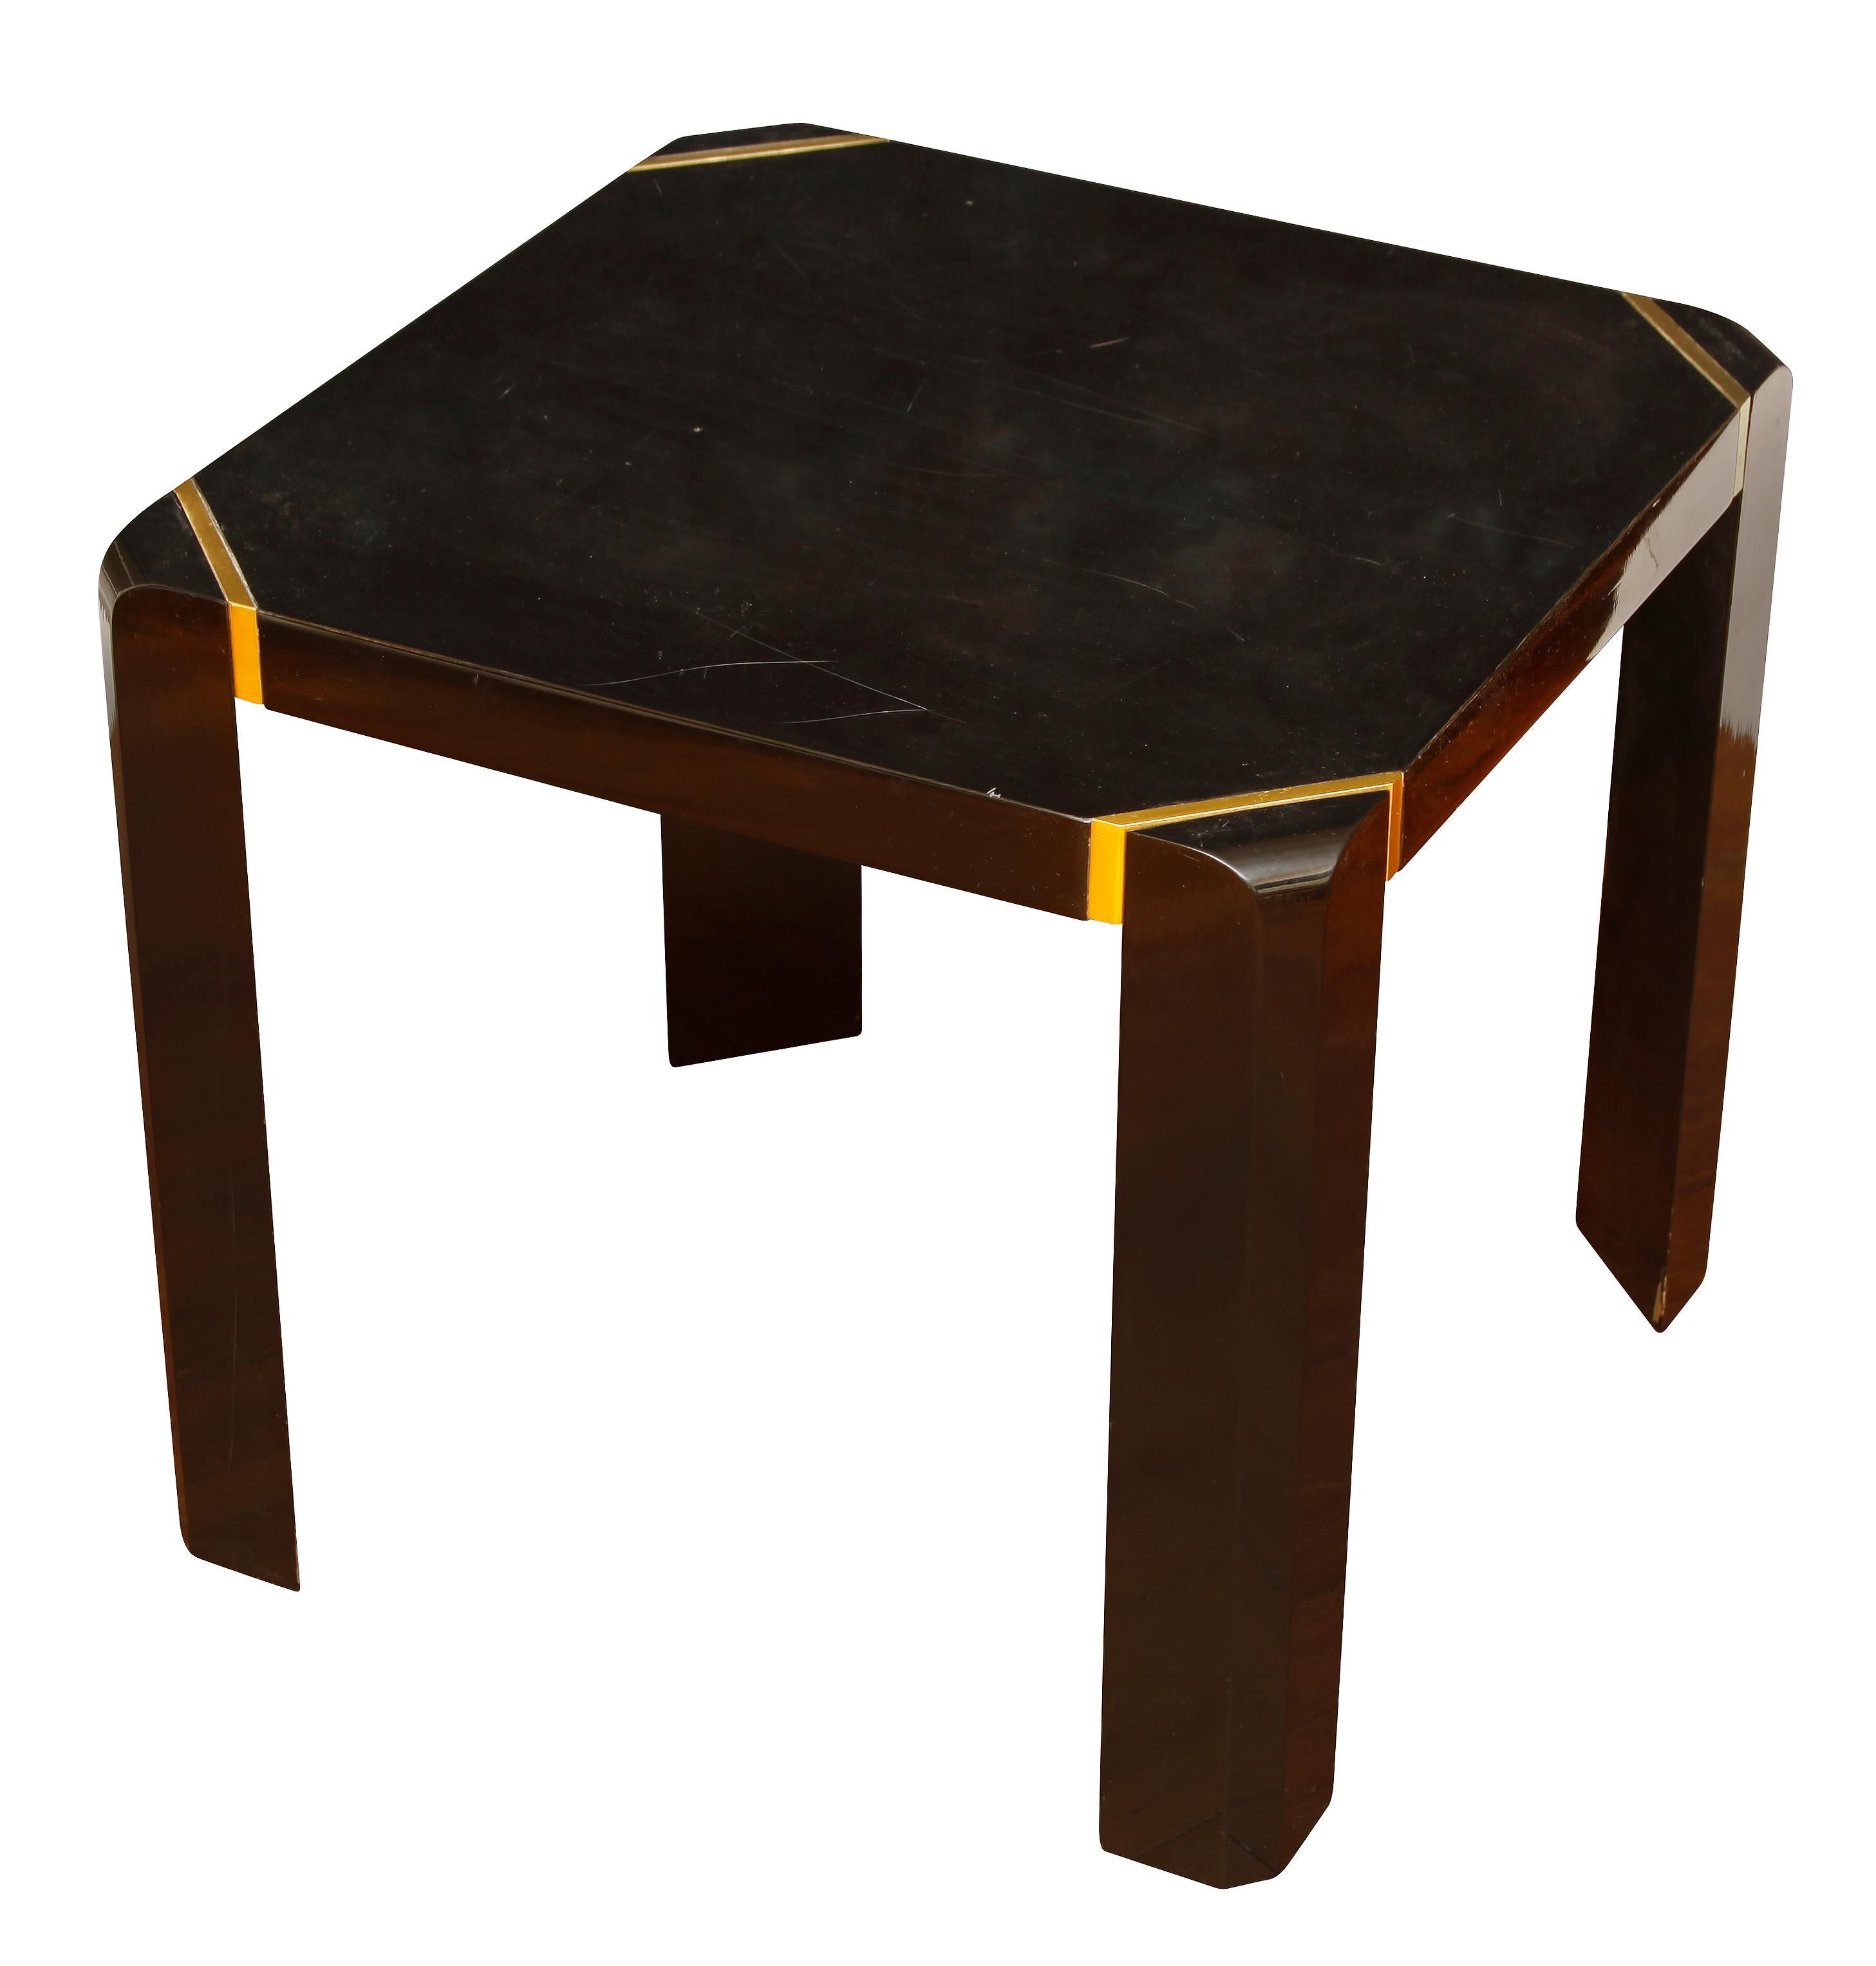 A pair of modern black lacquer side tables with brass details to corners and trim.